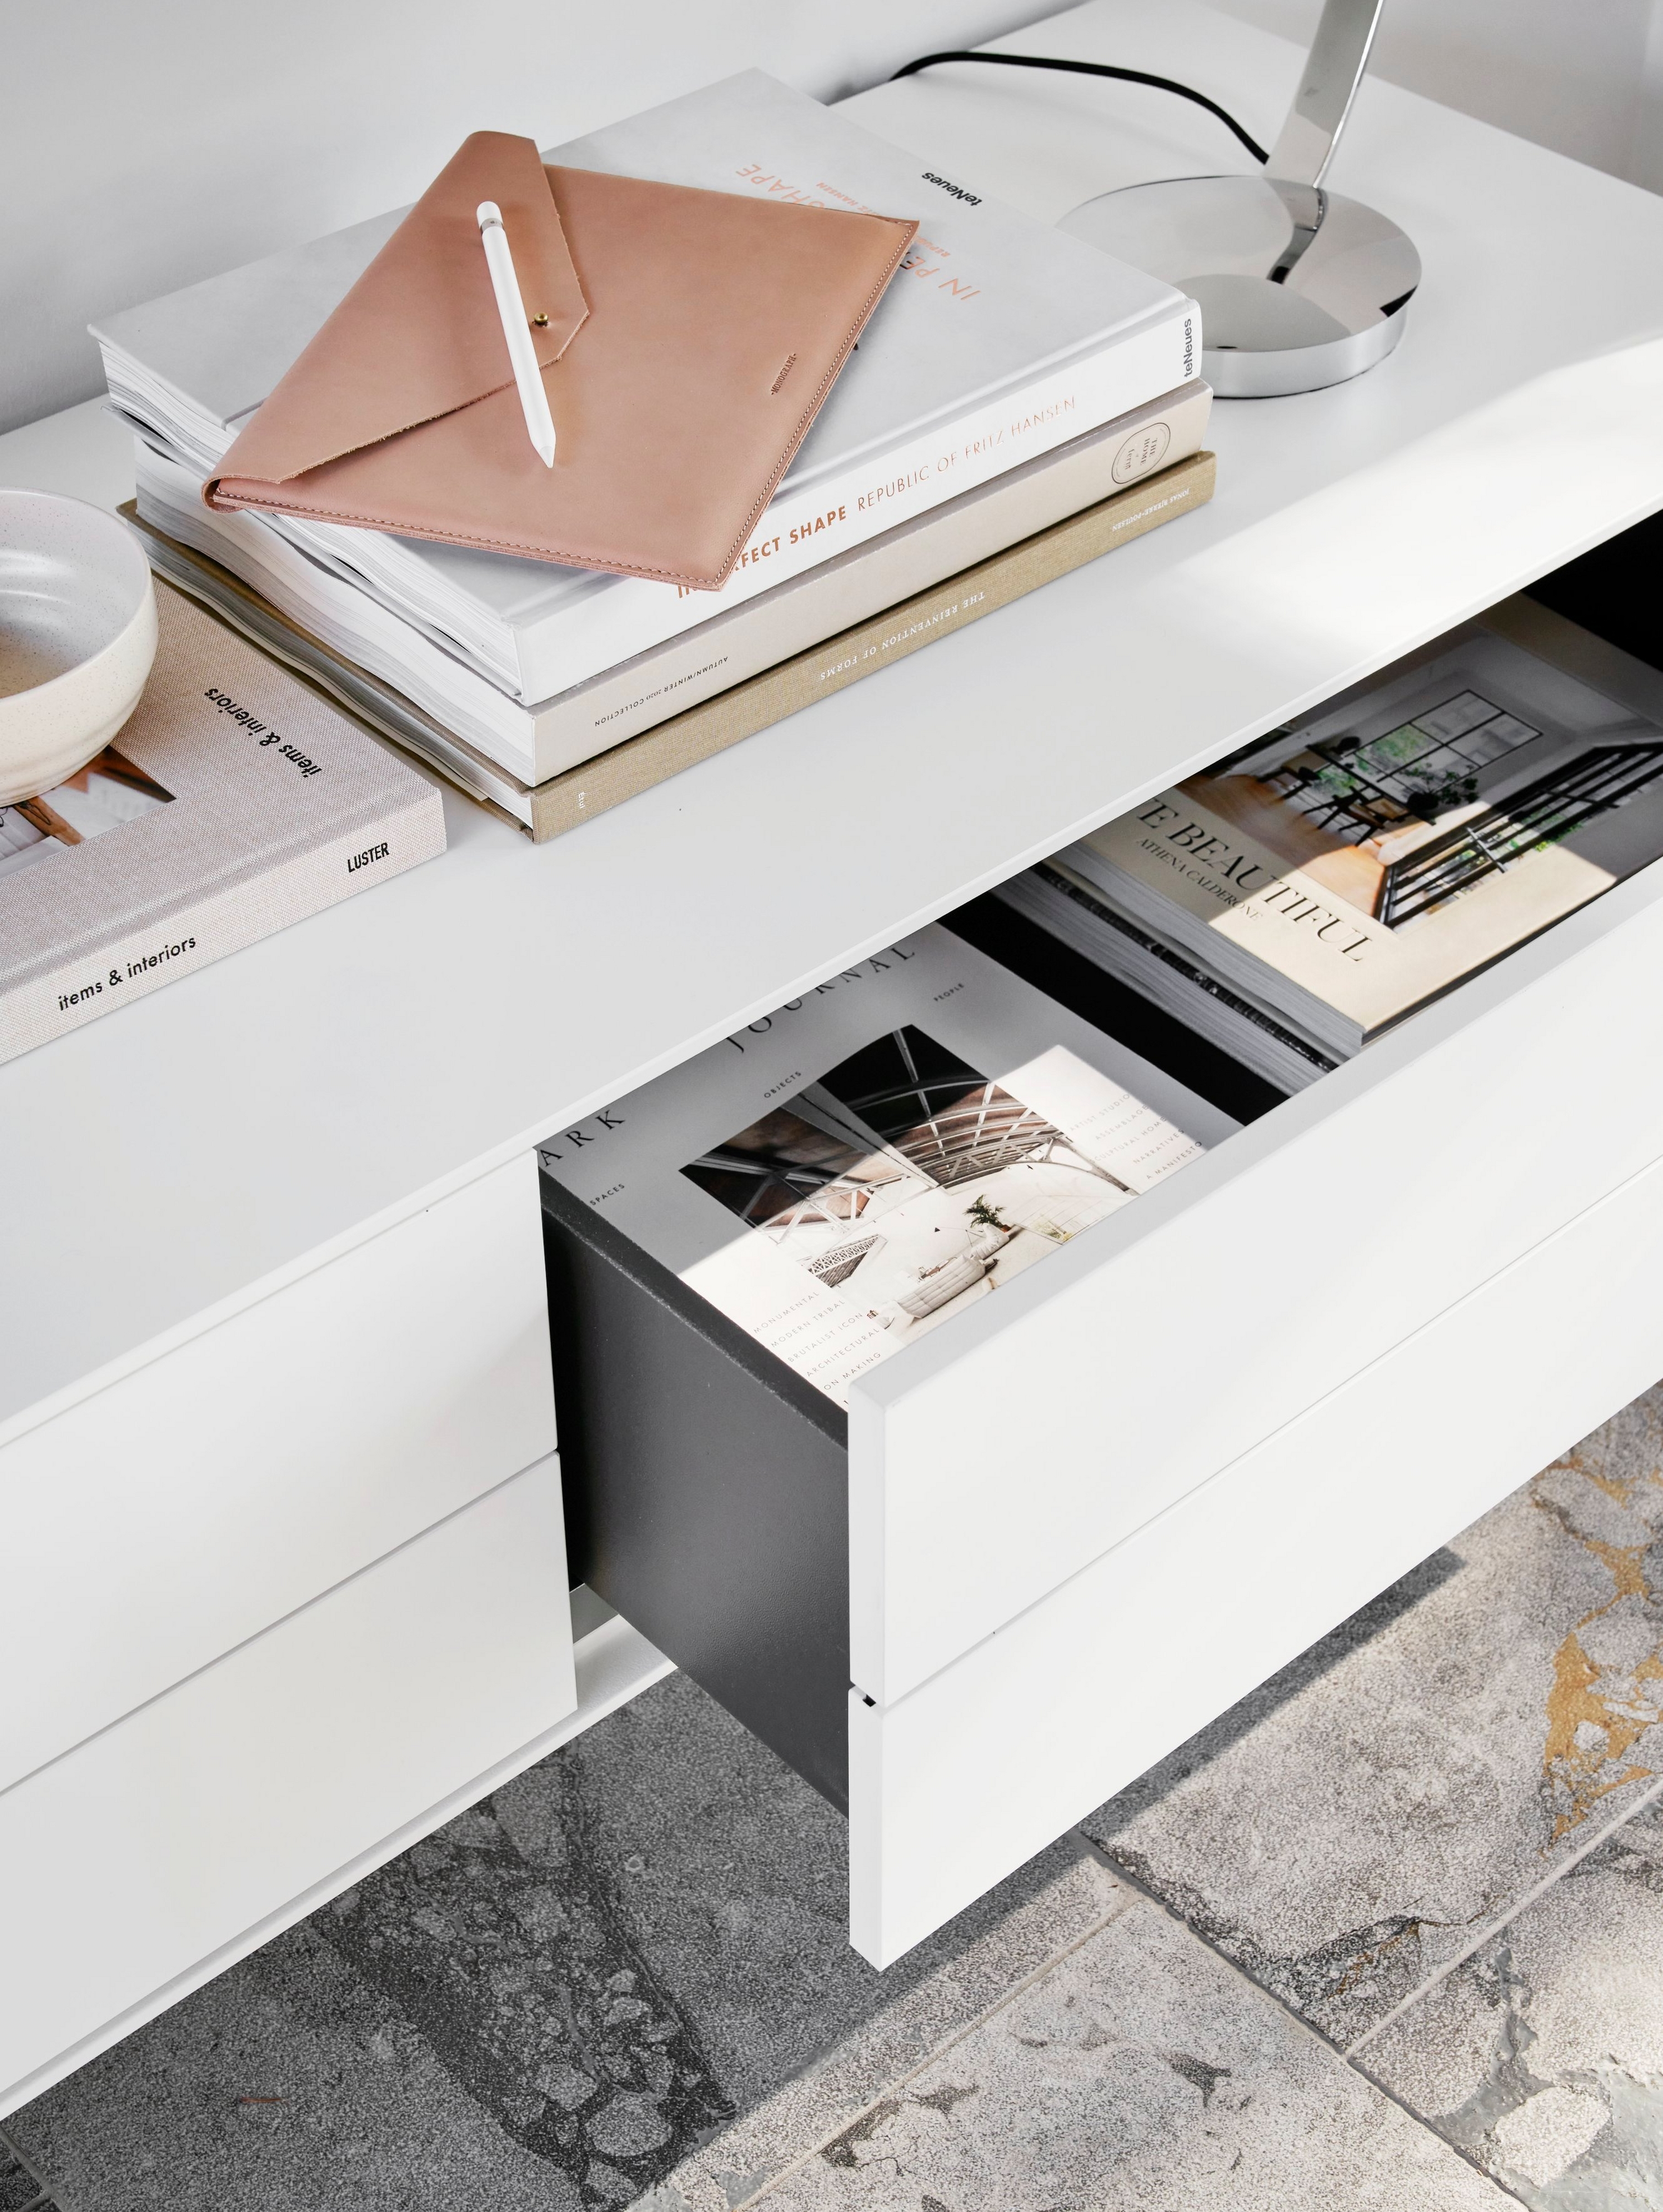 Desk with books, a leather folder and an open drawer revealing magazines